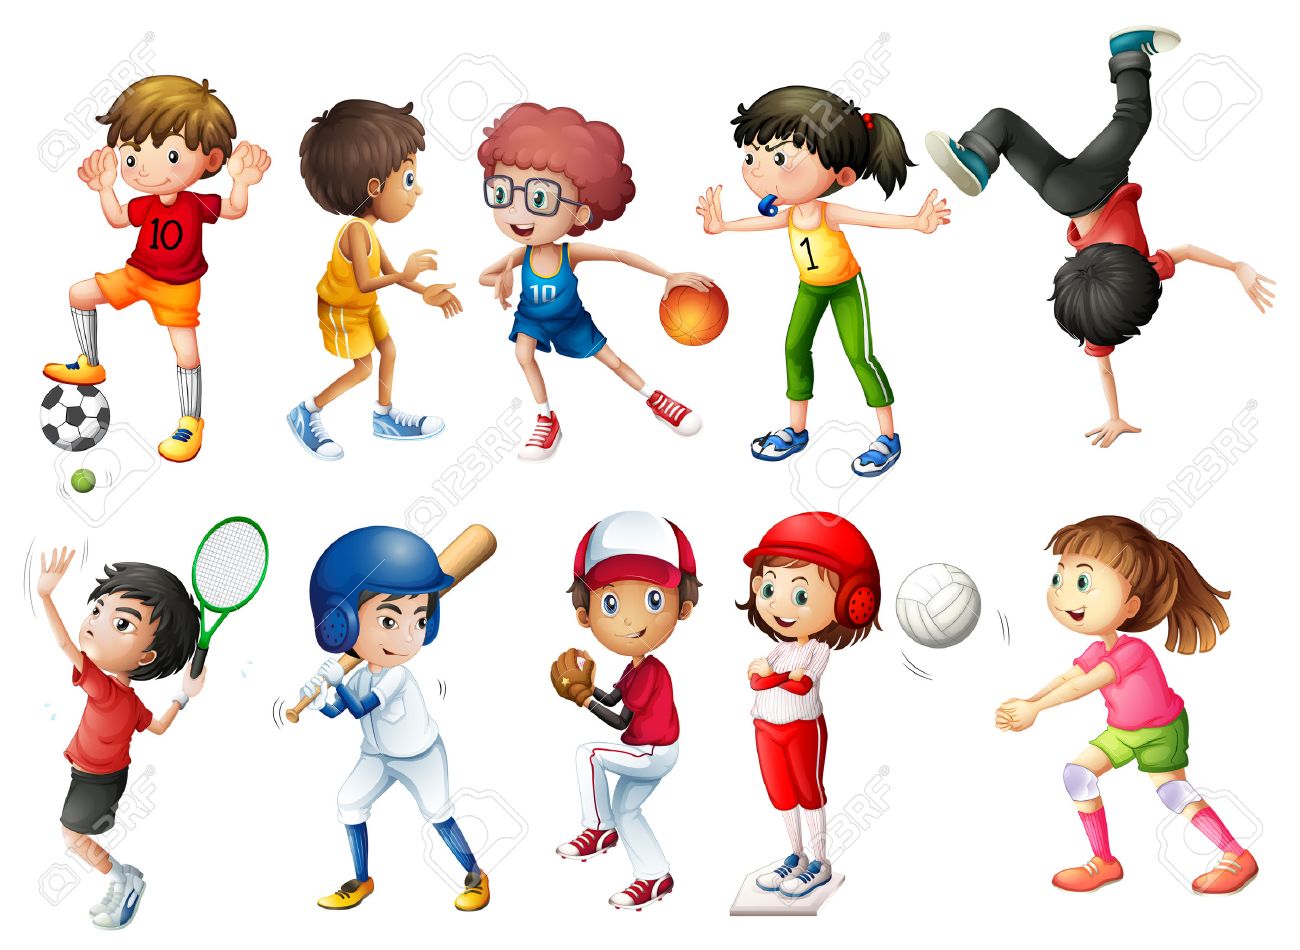 Playing sports clipart.